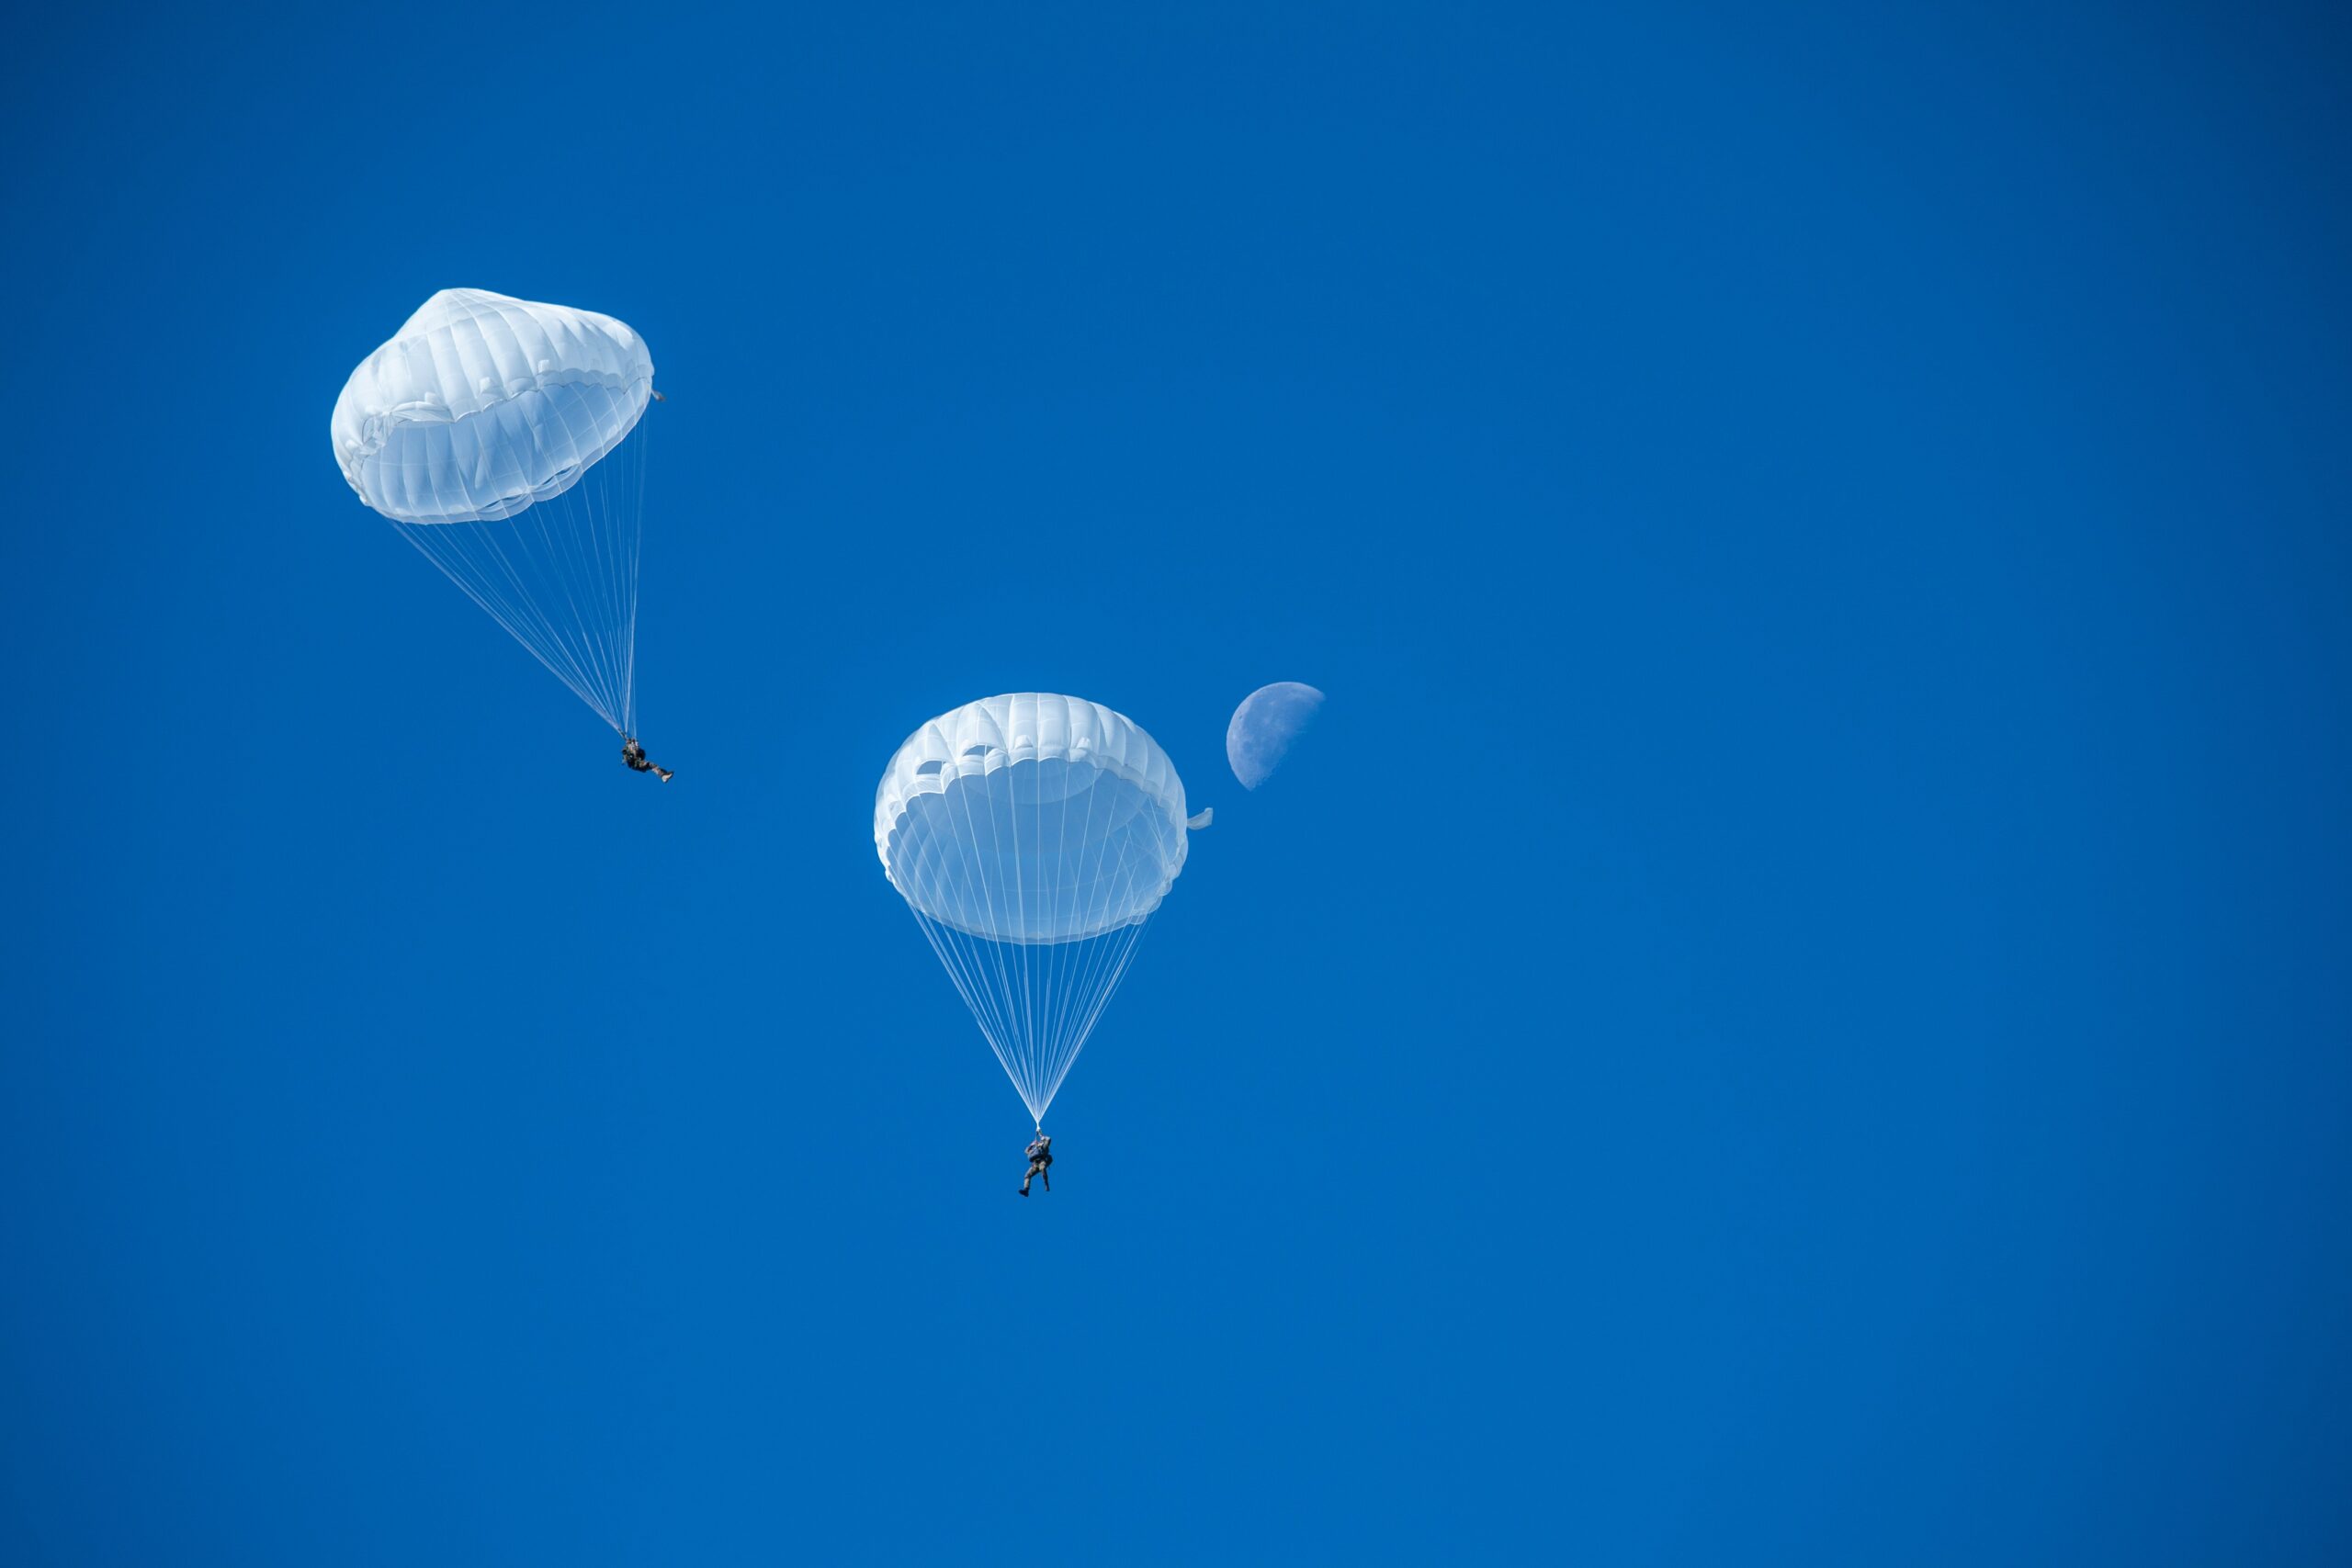 two people parachuting in the sky